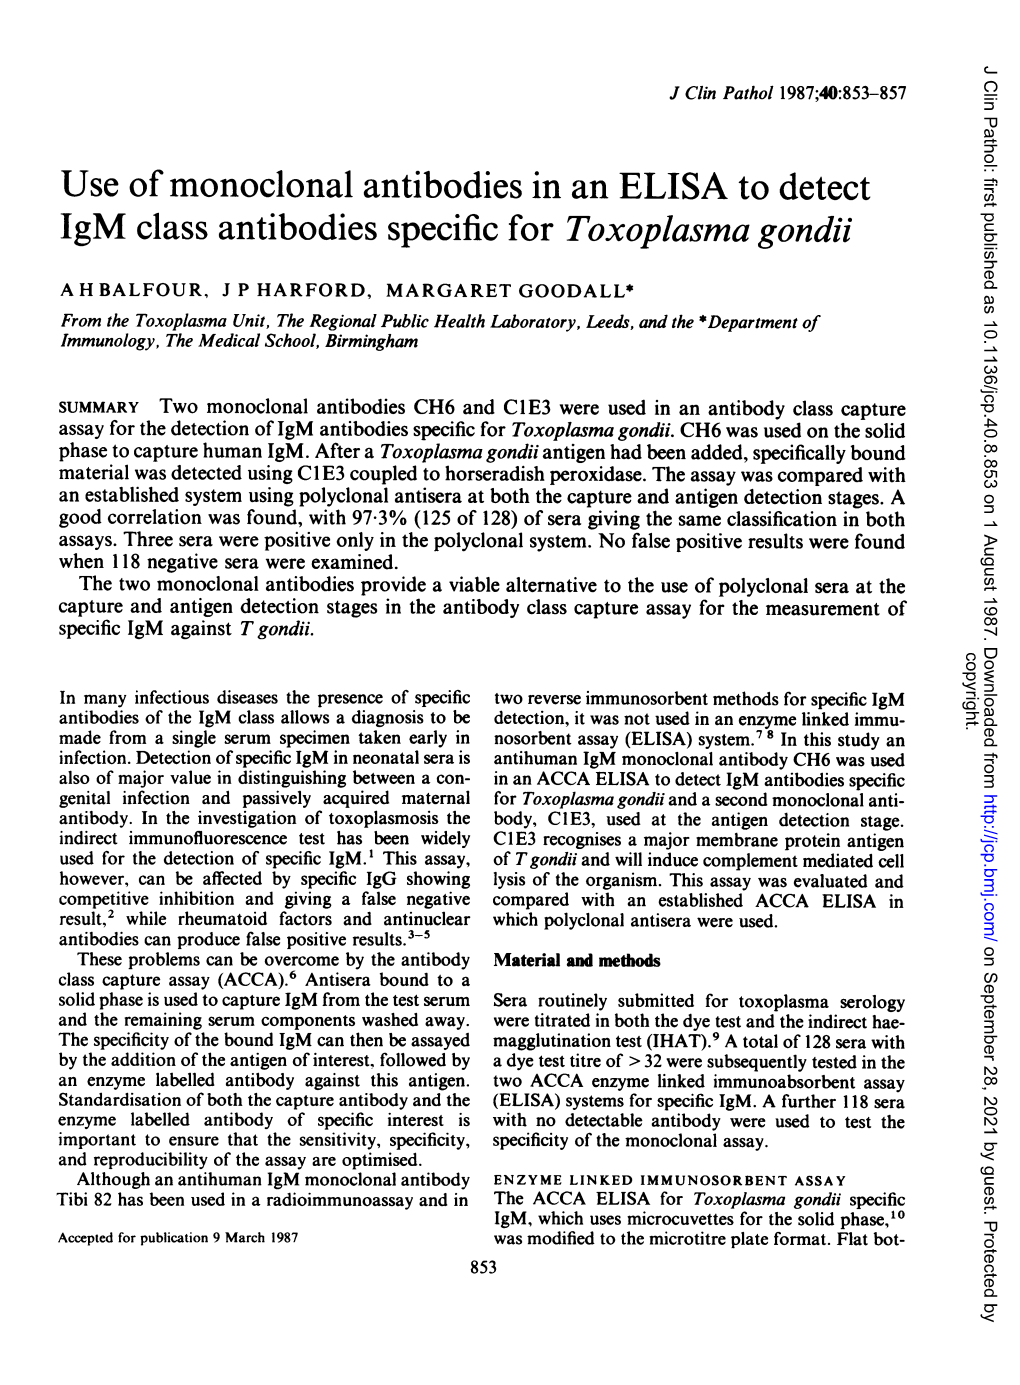 Use of Monoclonal Antibodies in an ELISA to Detect Igm Class Antibodies Specific for Toxoplasma Gondii